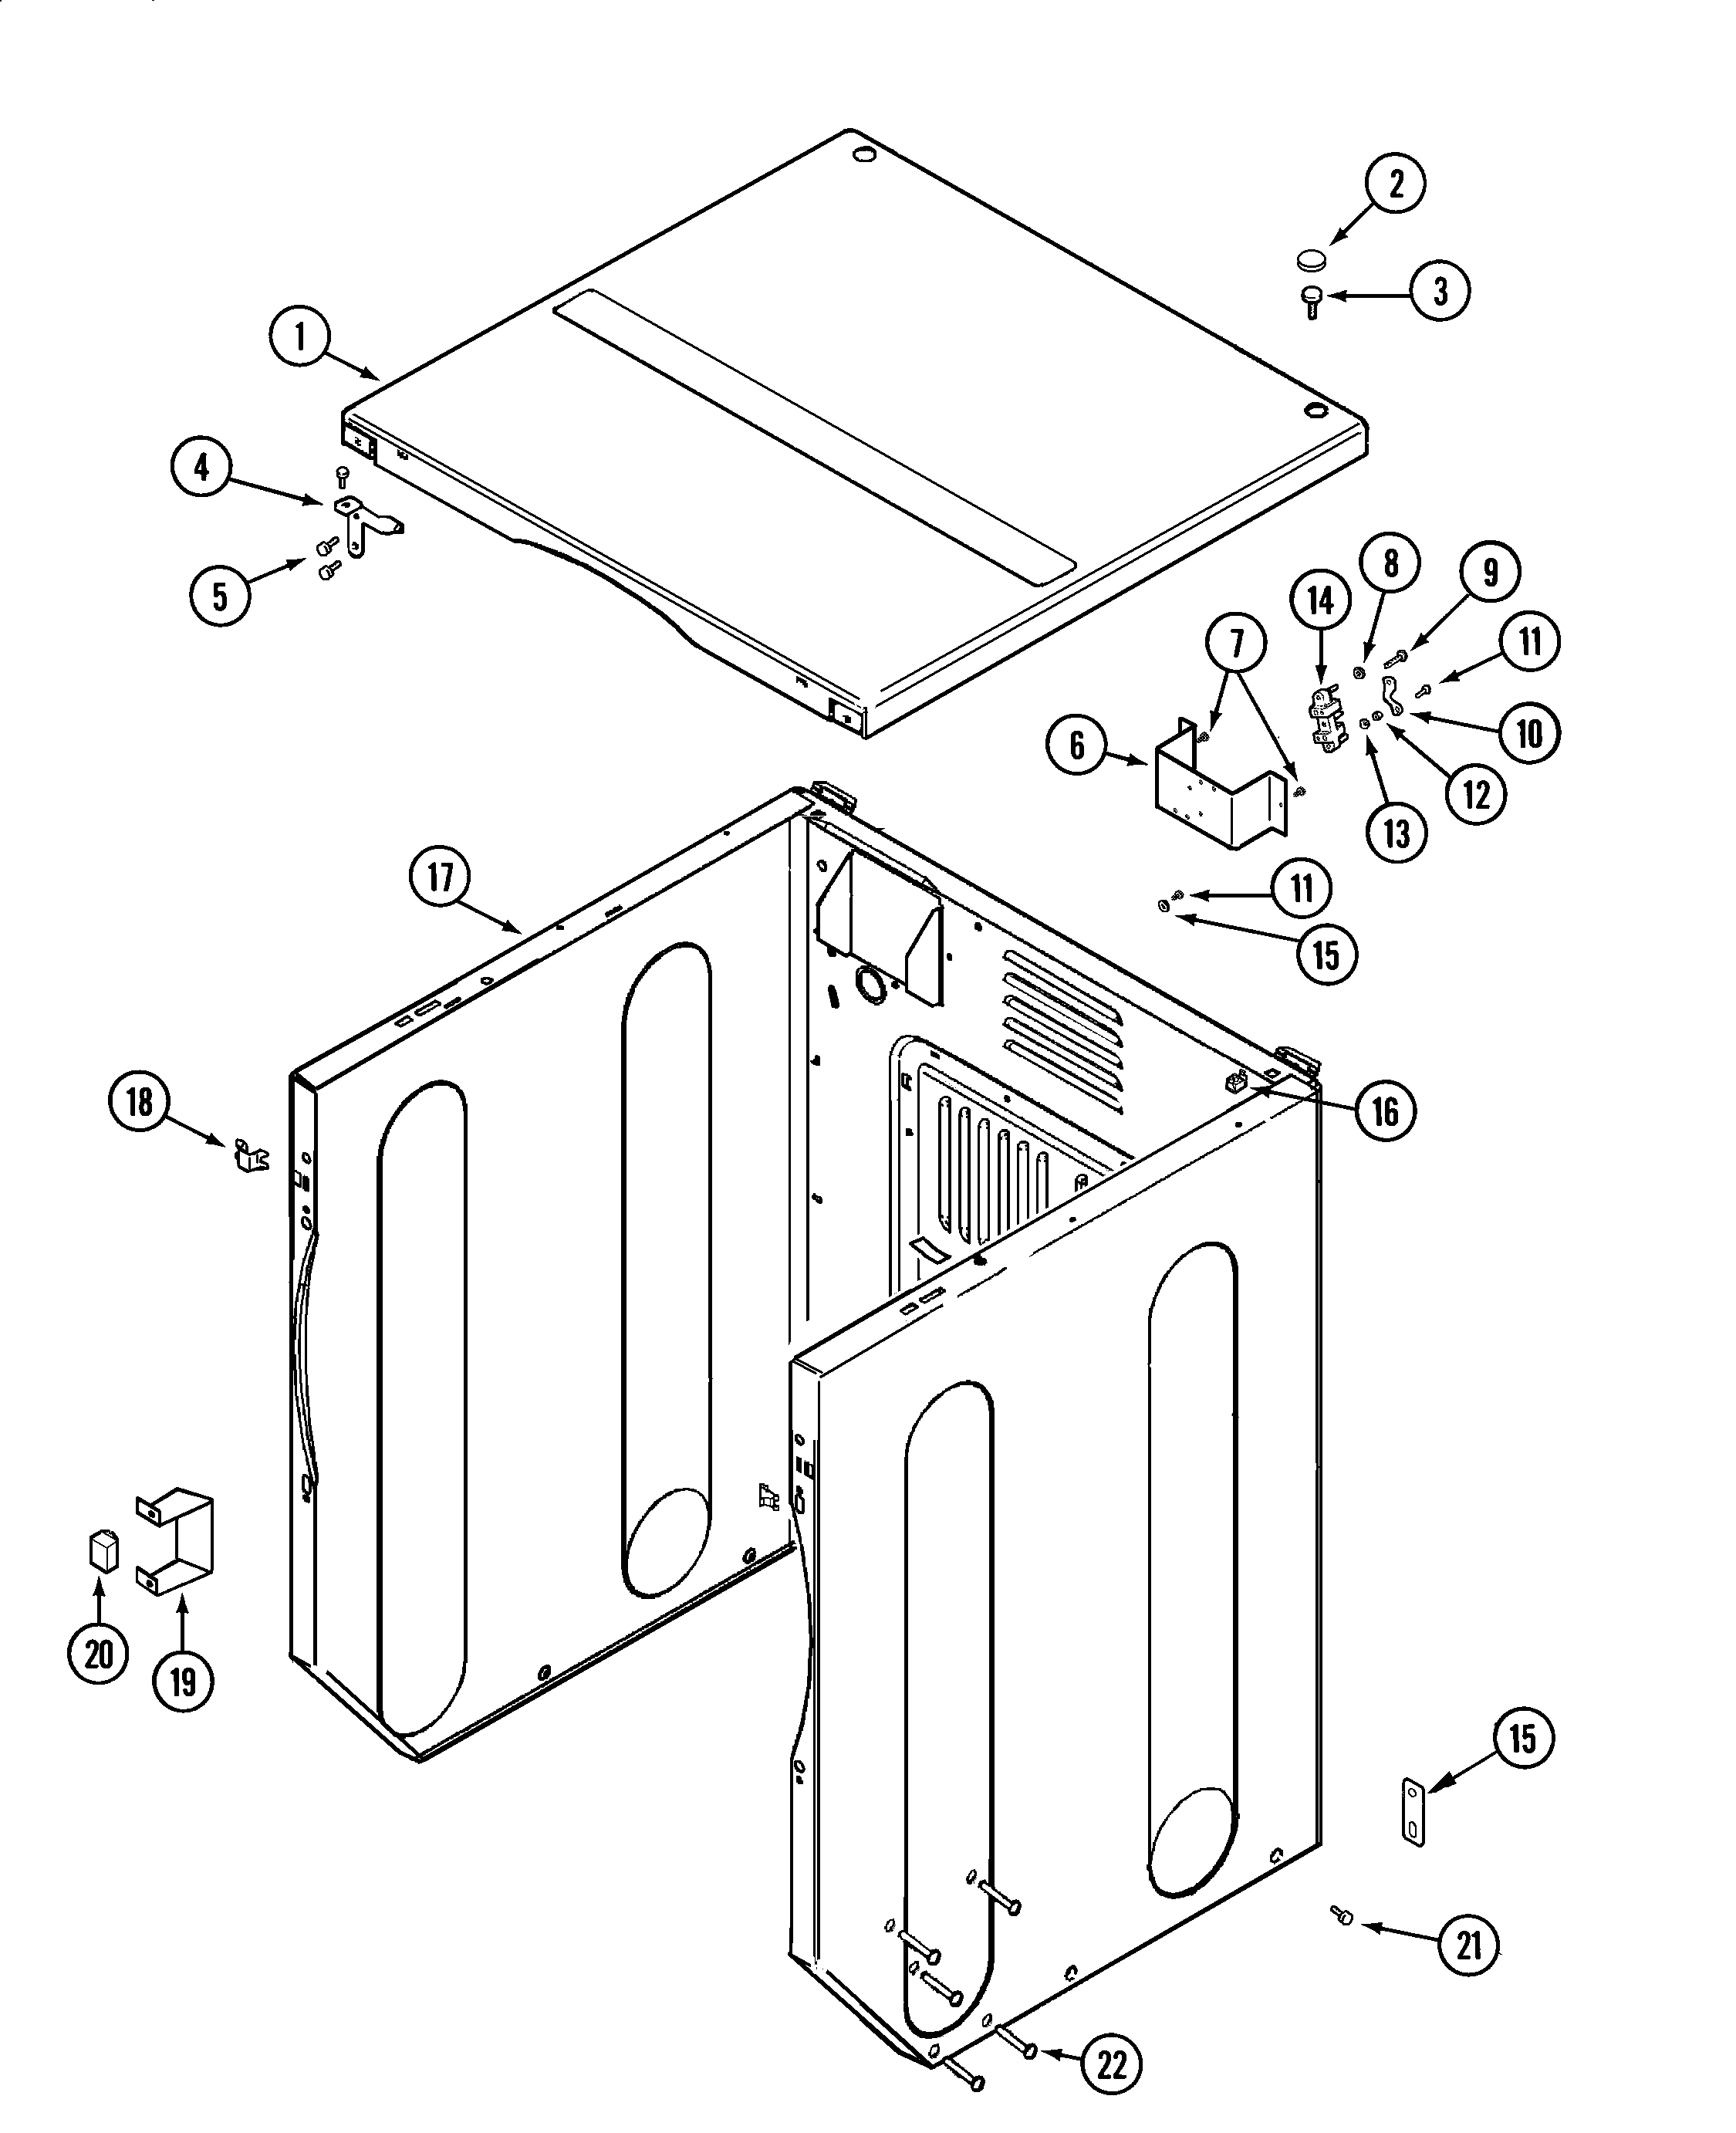 02 - CABINET-FRONT (DRYER)